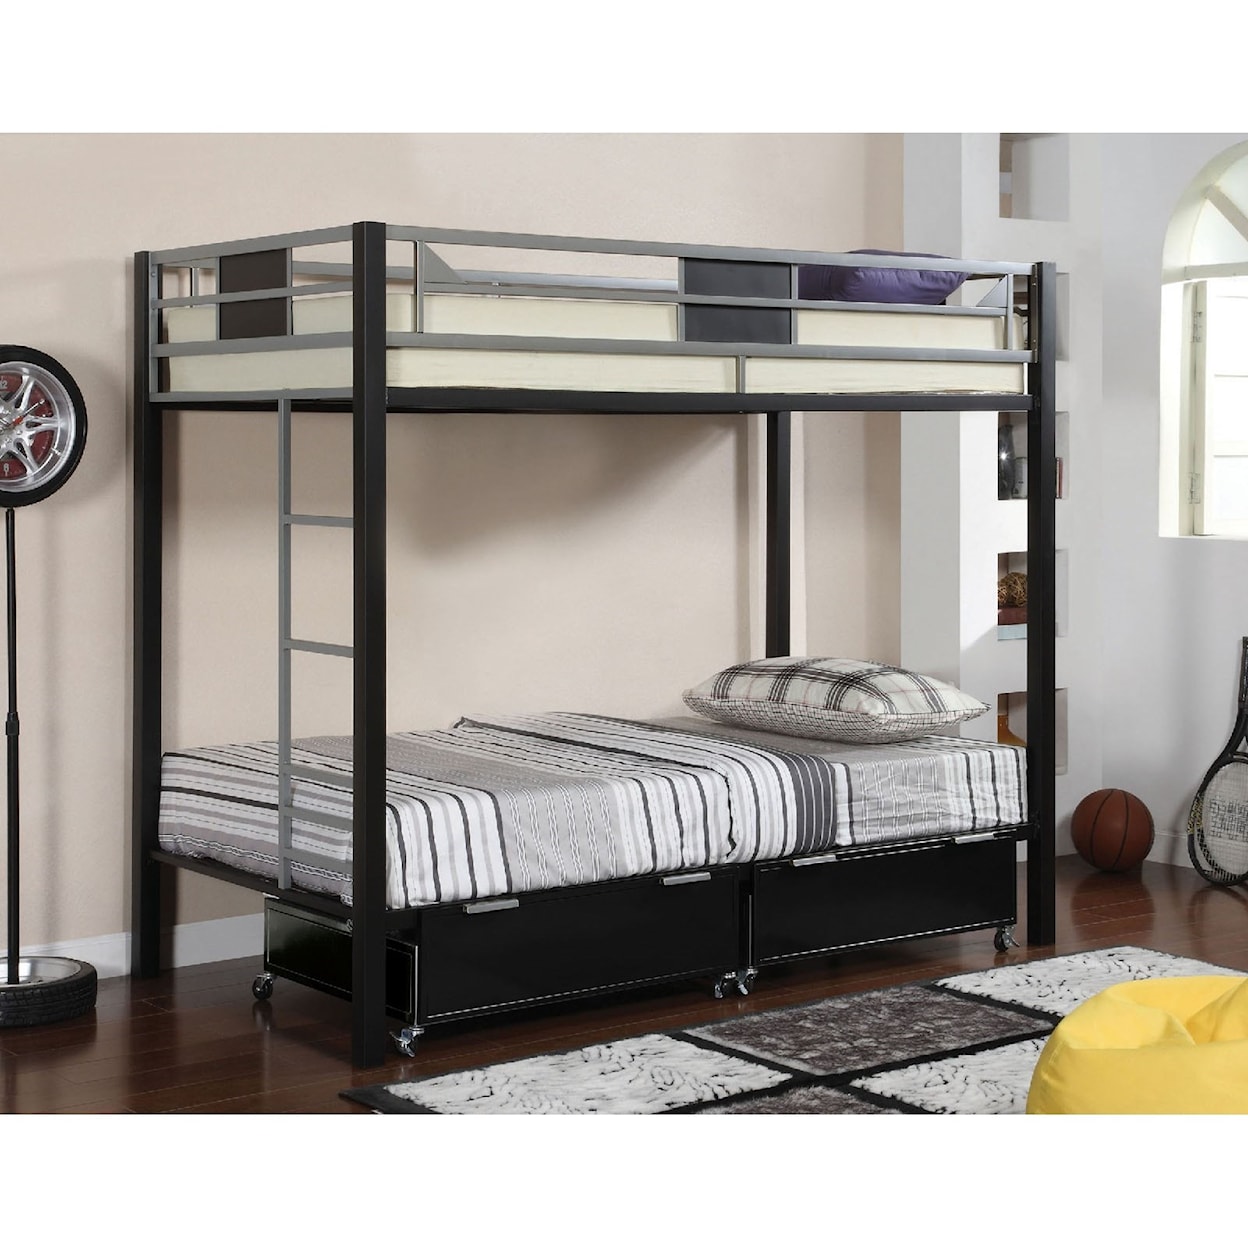 FUSA Clifton Twin OverTwin Bunk Bed